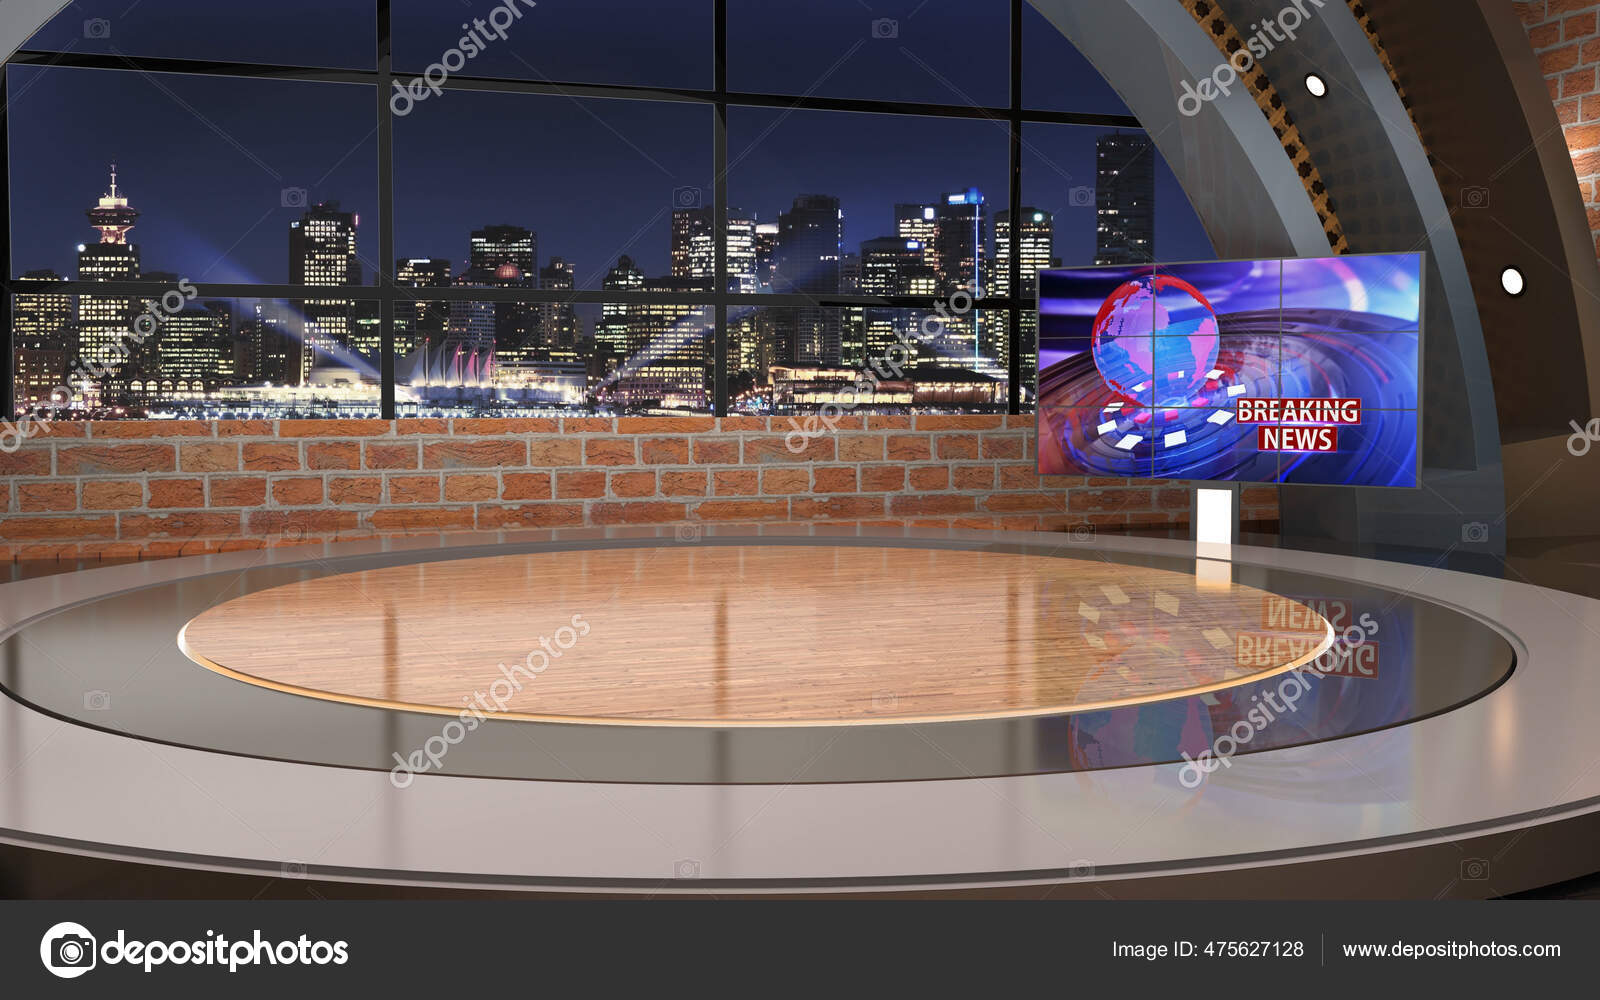 News Room Background Stock Photos Royalty Free News Room Background Images Depositphotos